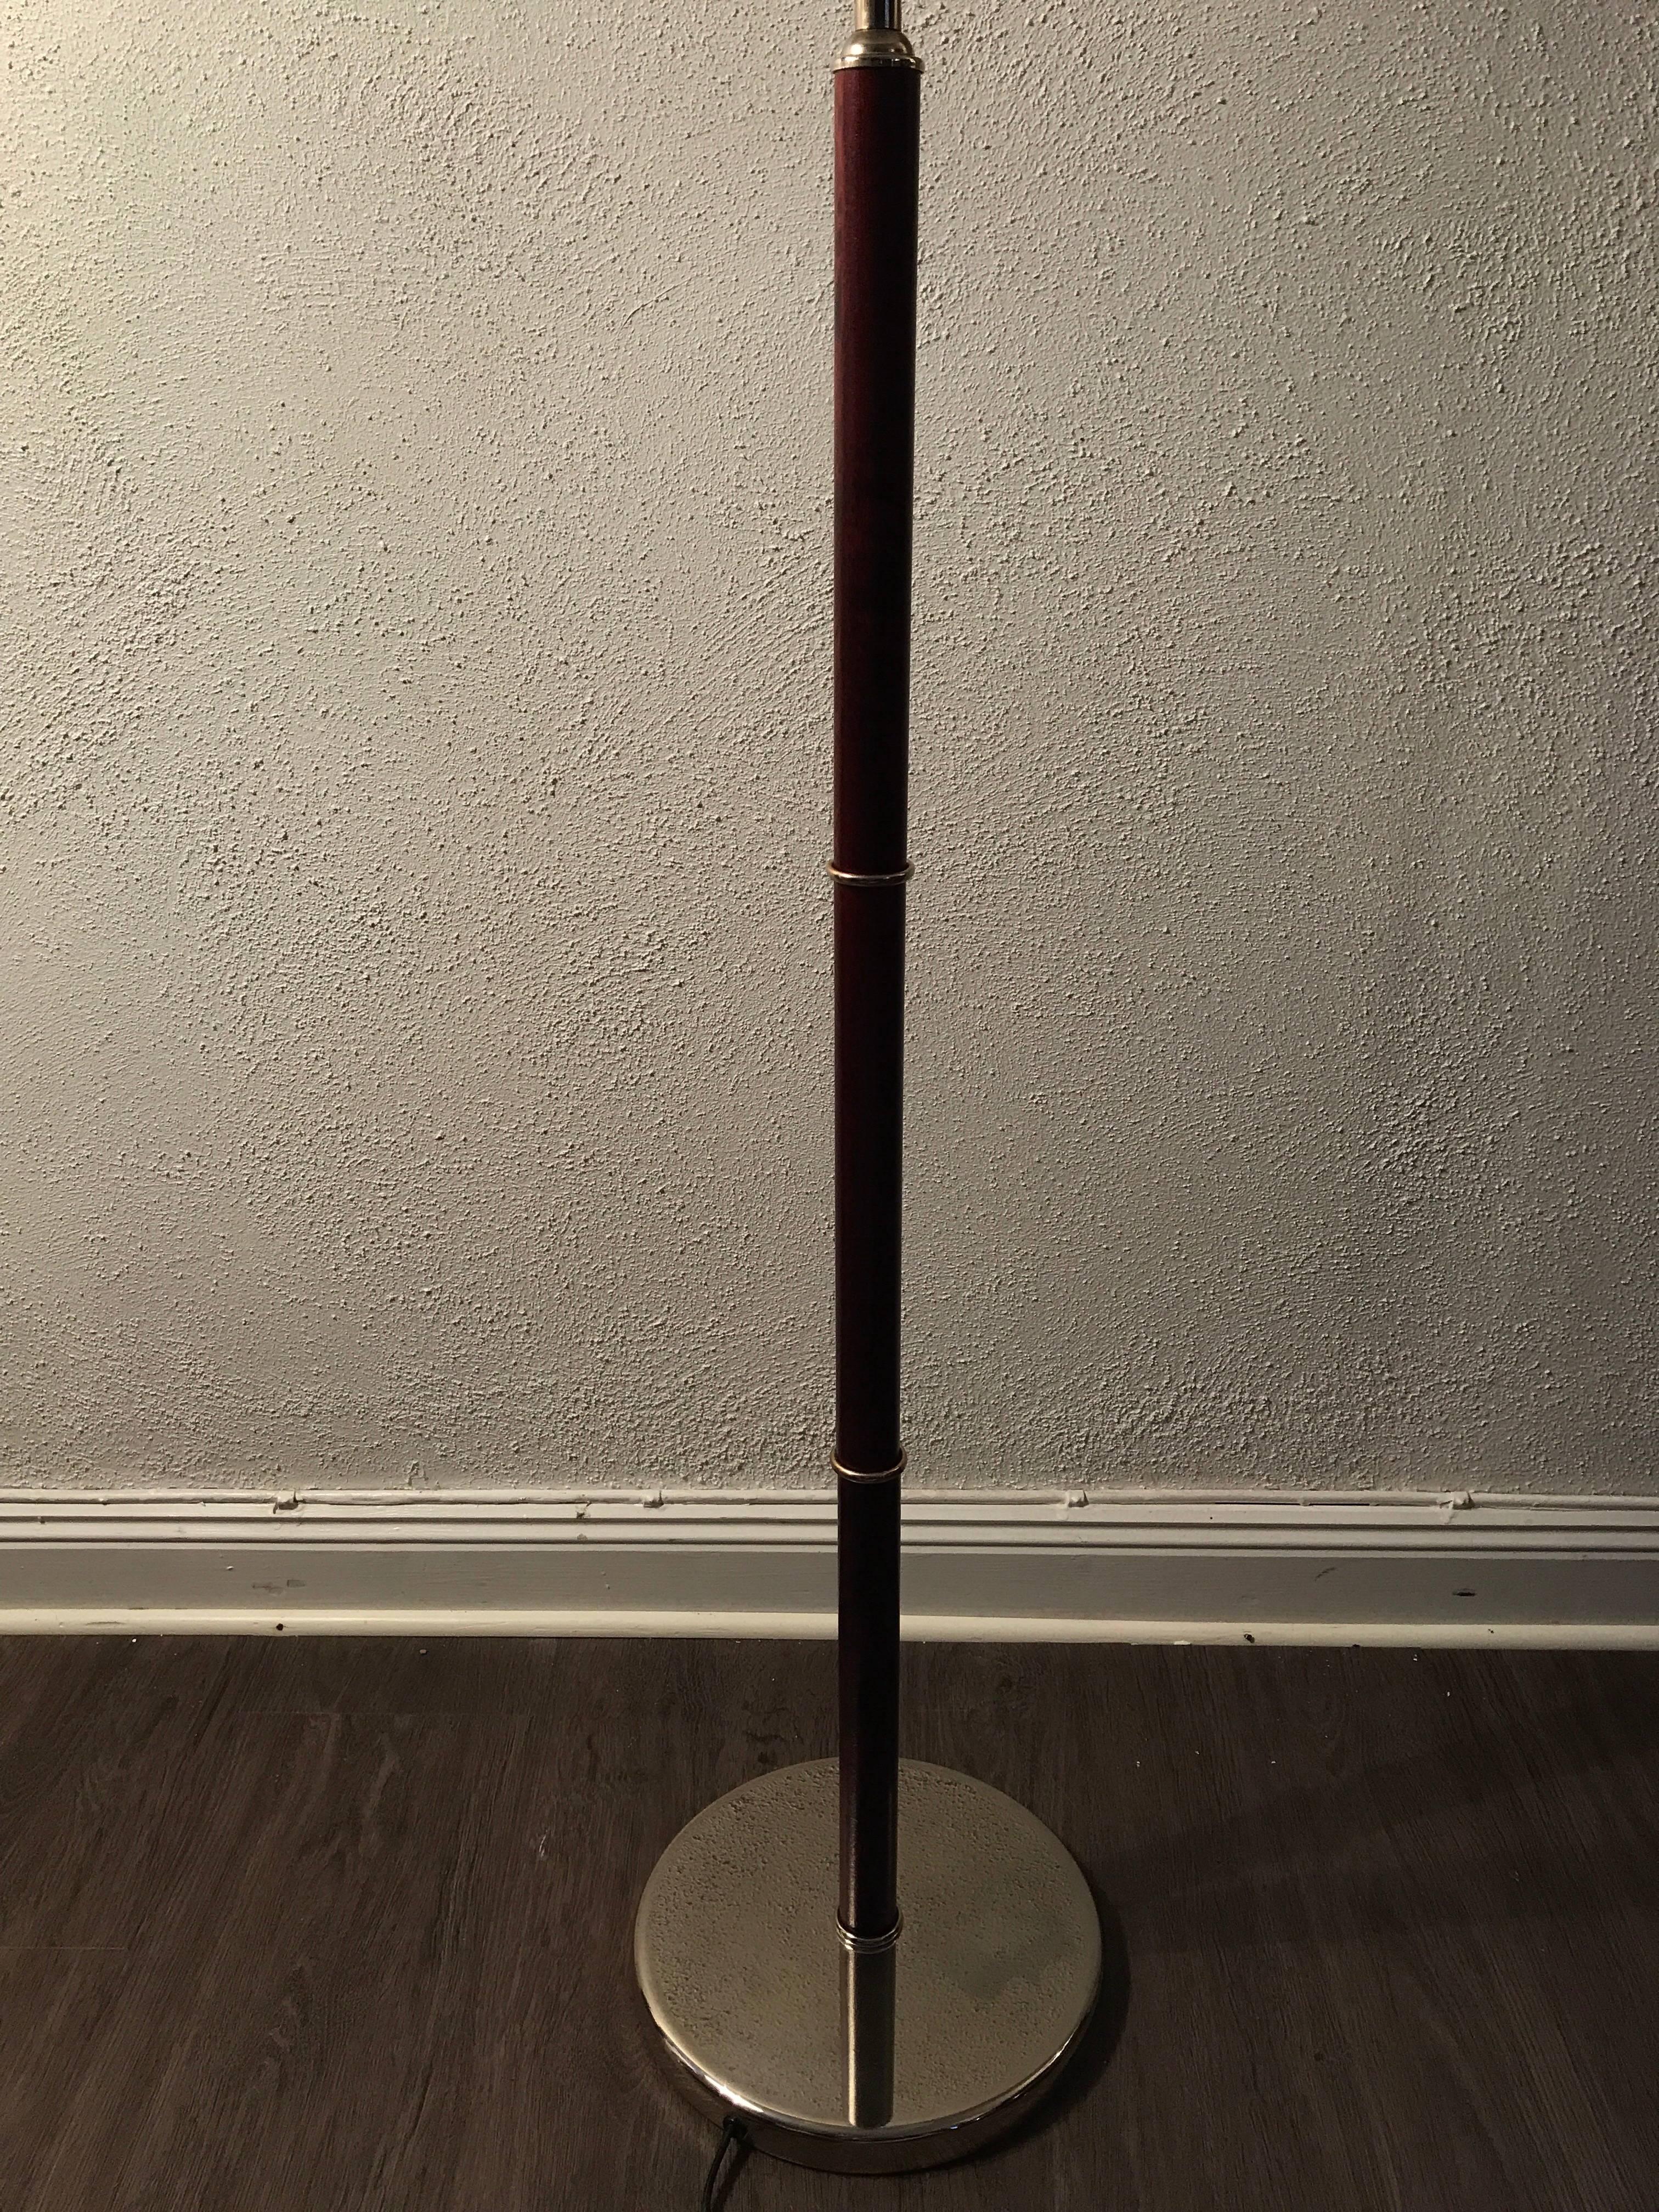 Rare Swedish Cherrywood and Steel Floor Lamp Made by Belid AB, 1980 For Sale 1